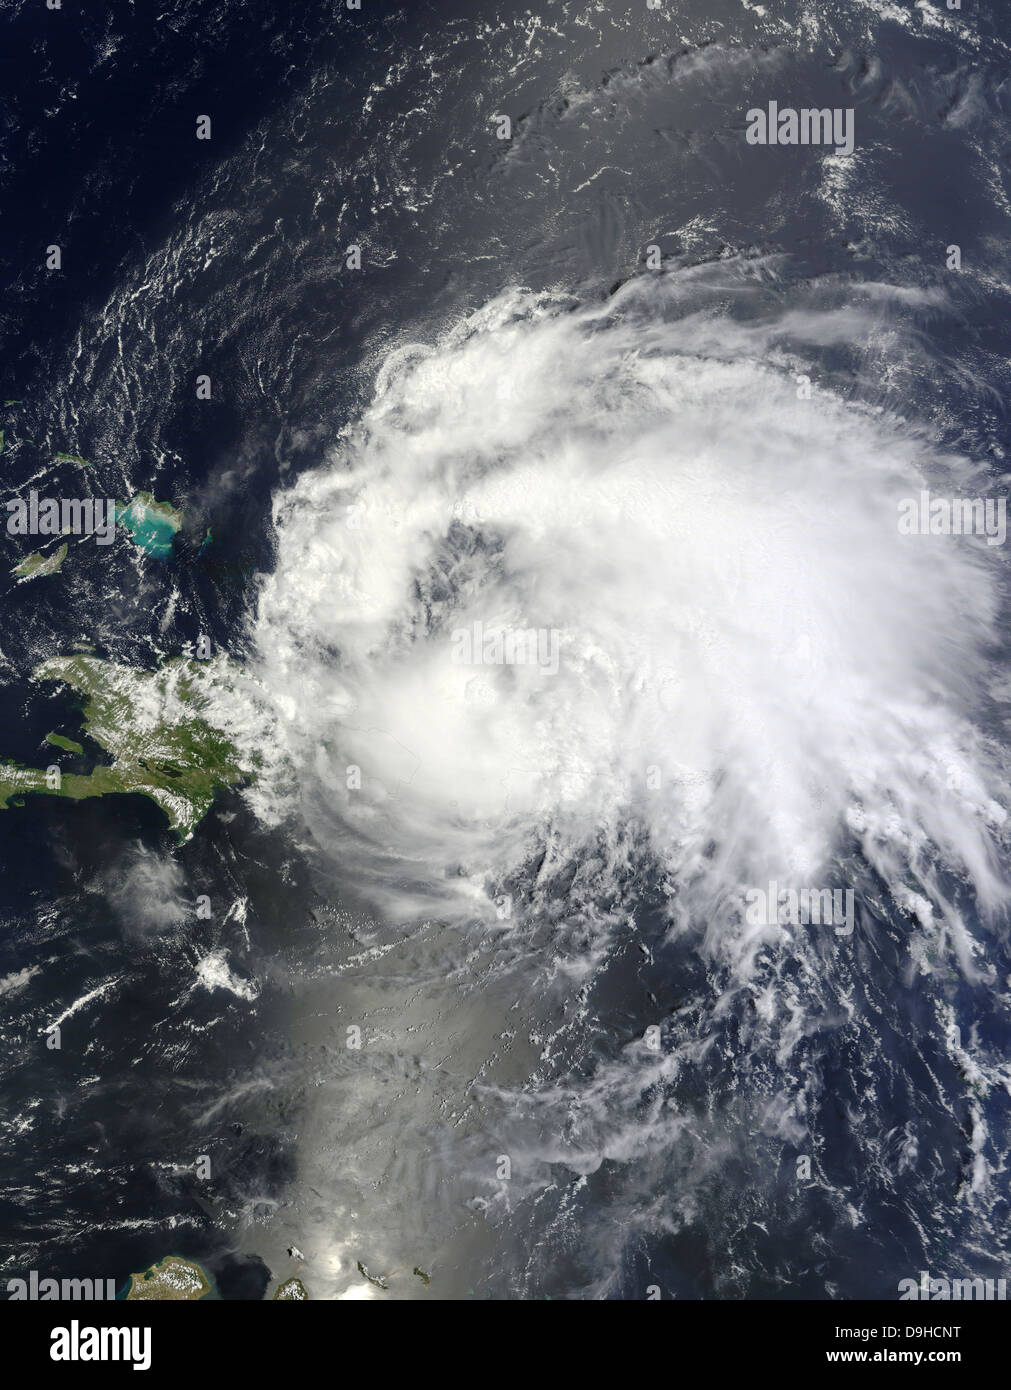 August 22, 2011 - Satellite view of Hurricane Irene over parts of the Dominican Republic, and all of Puerto Rico. Stock Photo